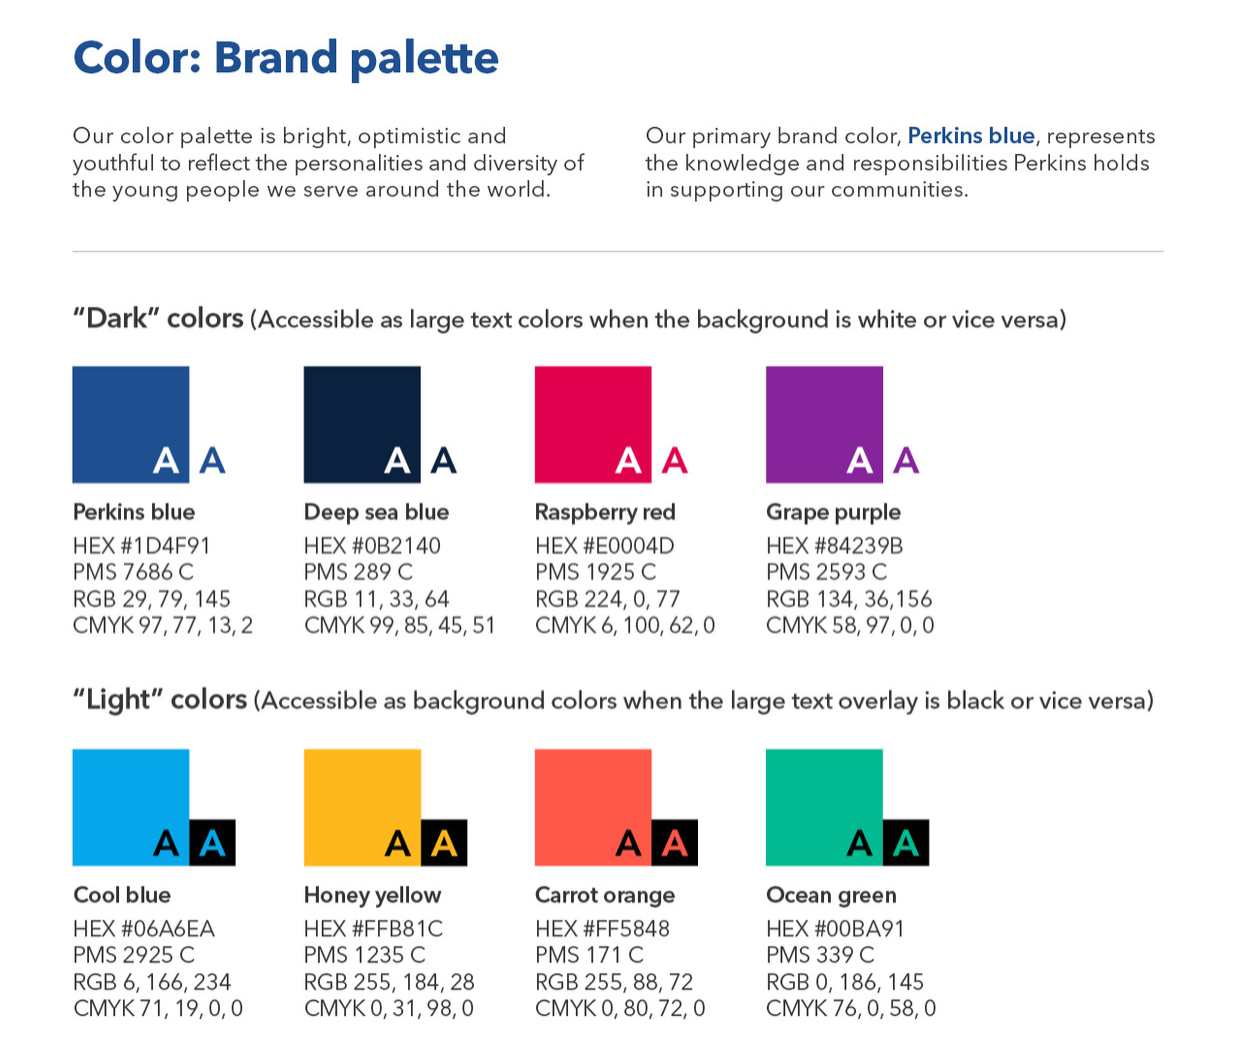 Screenshot of an excerpt from the Perkins brand color palette showing the Hex, PMS, RGB and CMYK values for dark and light colors.